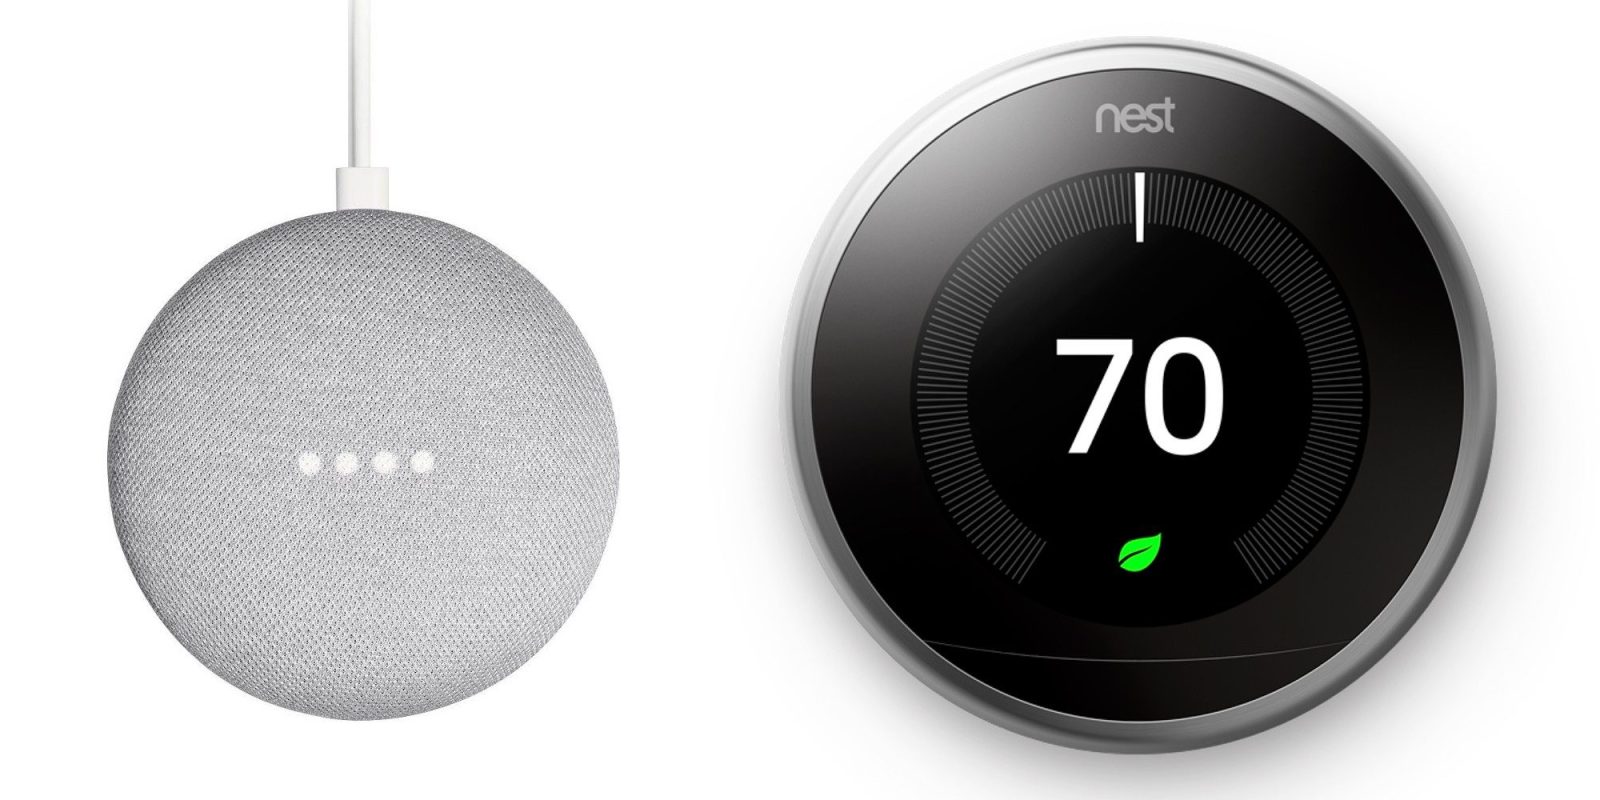 Google Home Mini and Nest Thermostat